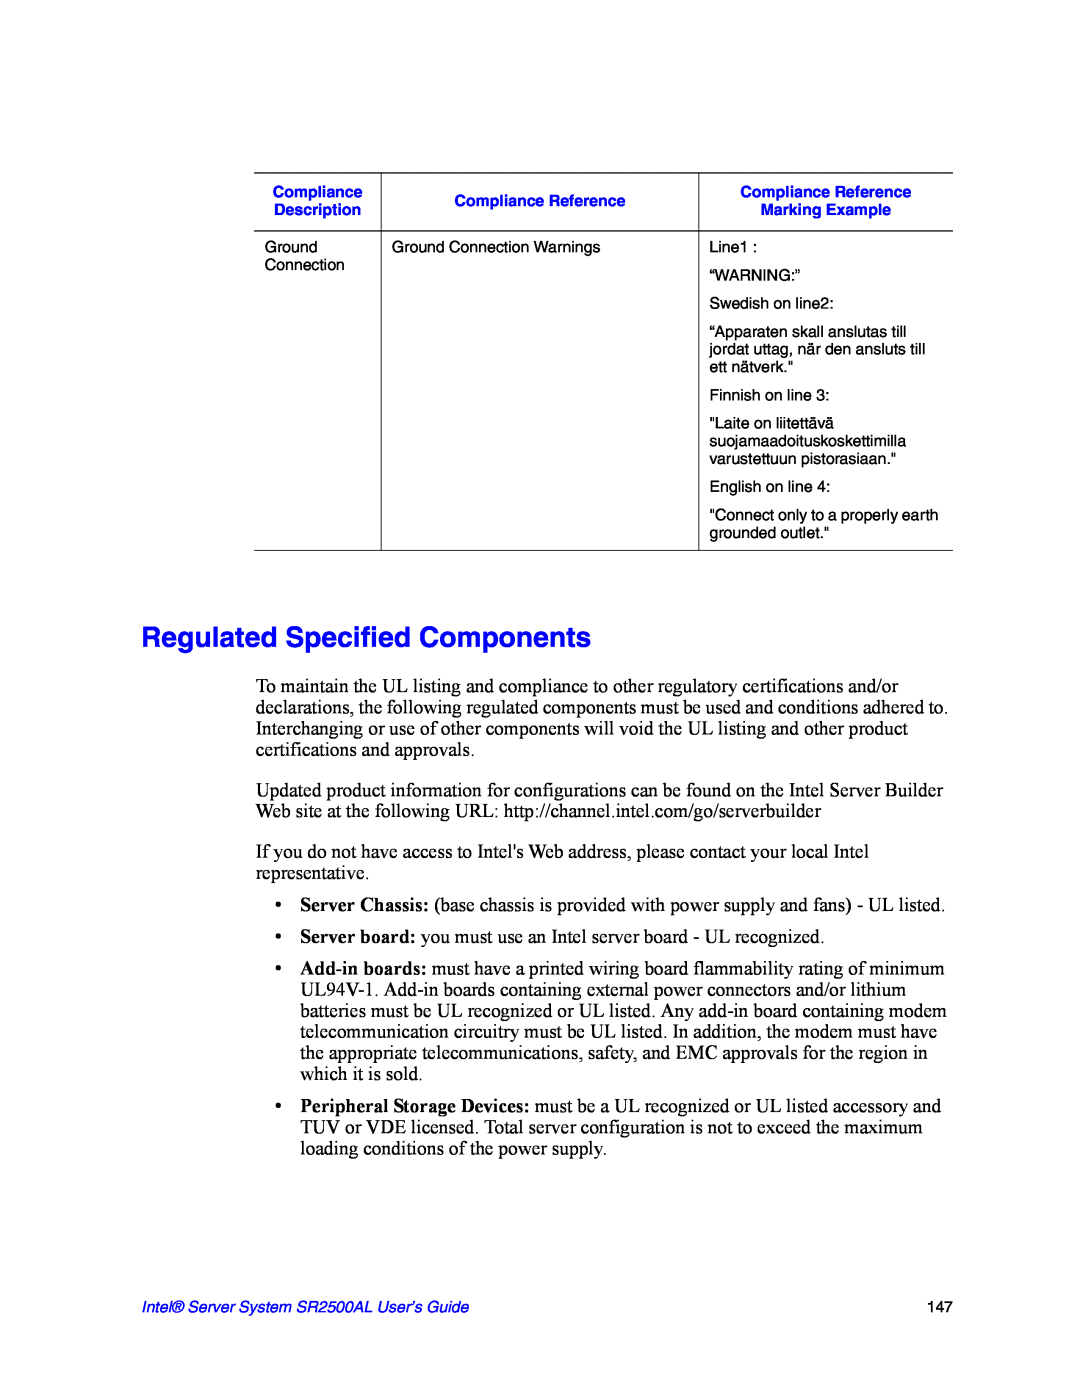 Intel SR2500AL manual Regulated Specified Components 